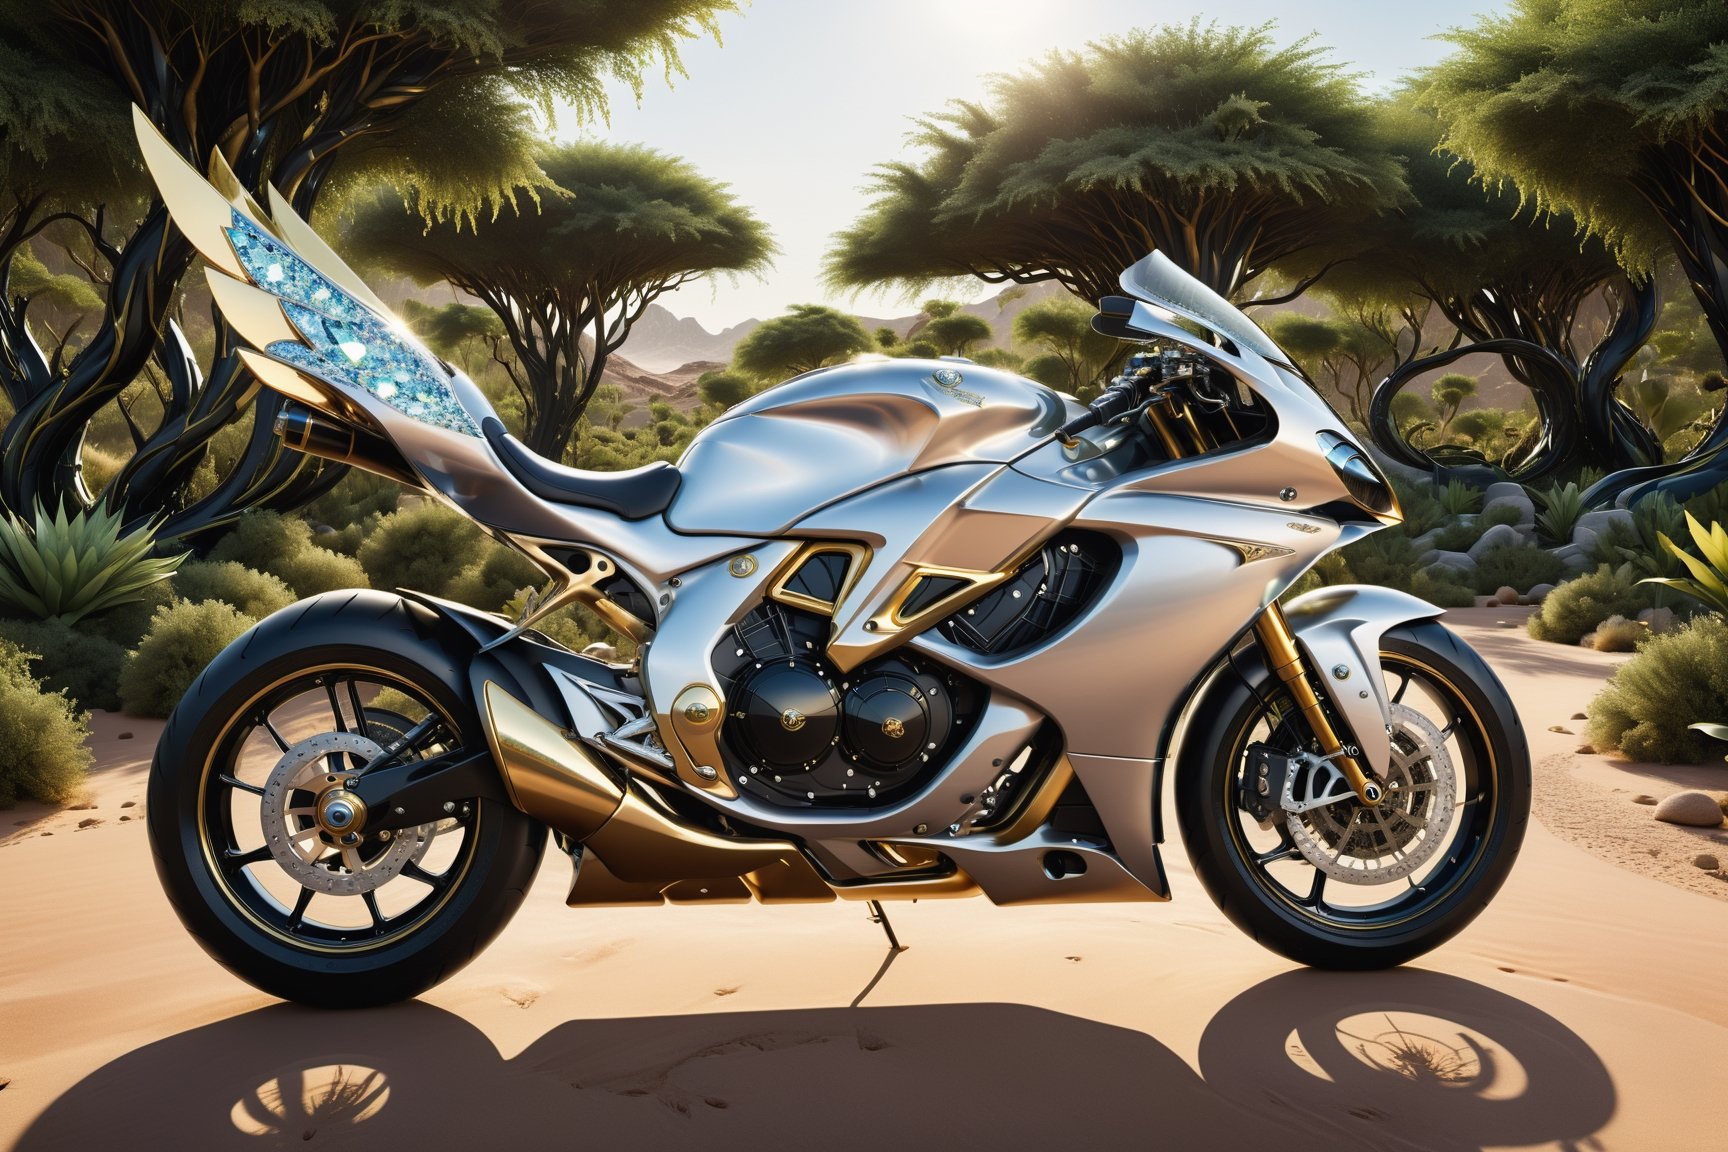 High definition photorealistic render of a luxury superbike in yacht very sculptural, in the surrealistic in a desert full of jungle, vines, giant trees and many rocks and a mystical and enigmatic desert place, with and bubbles and rays, with fluid and organic shapes, with a background where a parametric sculpture with dragon wings appears, in metal, marble and iridescent glass, with precious diamonds, with symmetrical curves in the shape of dragon wings in marble background black & white details gold, chaotic swarowski, inspired by the style of Zaha Hadid, gold iridescence, with black and white details. The design is inspired by the Tomorrowland 2022 main stage, with ultra-realistic Art Deco details and a high level of image complexity iridescence.
